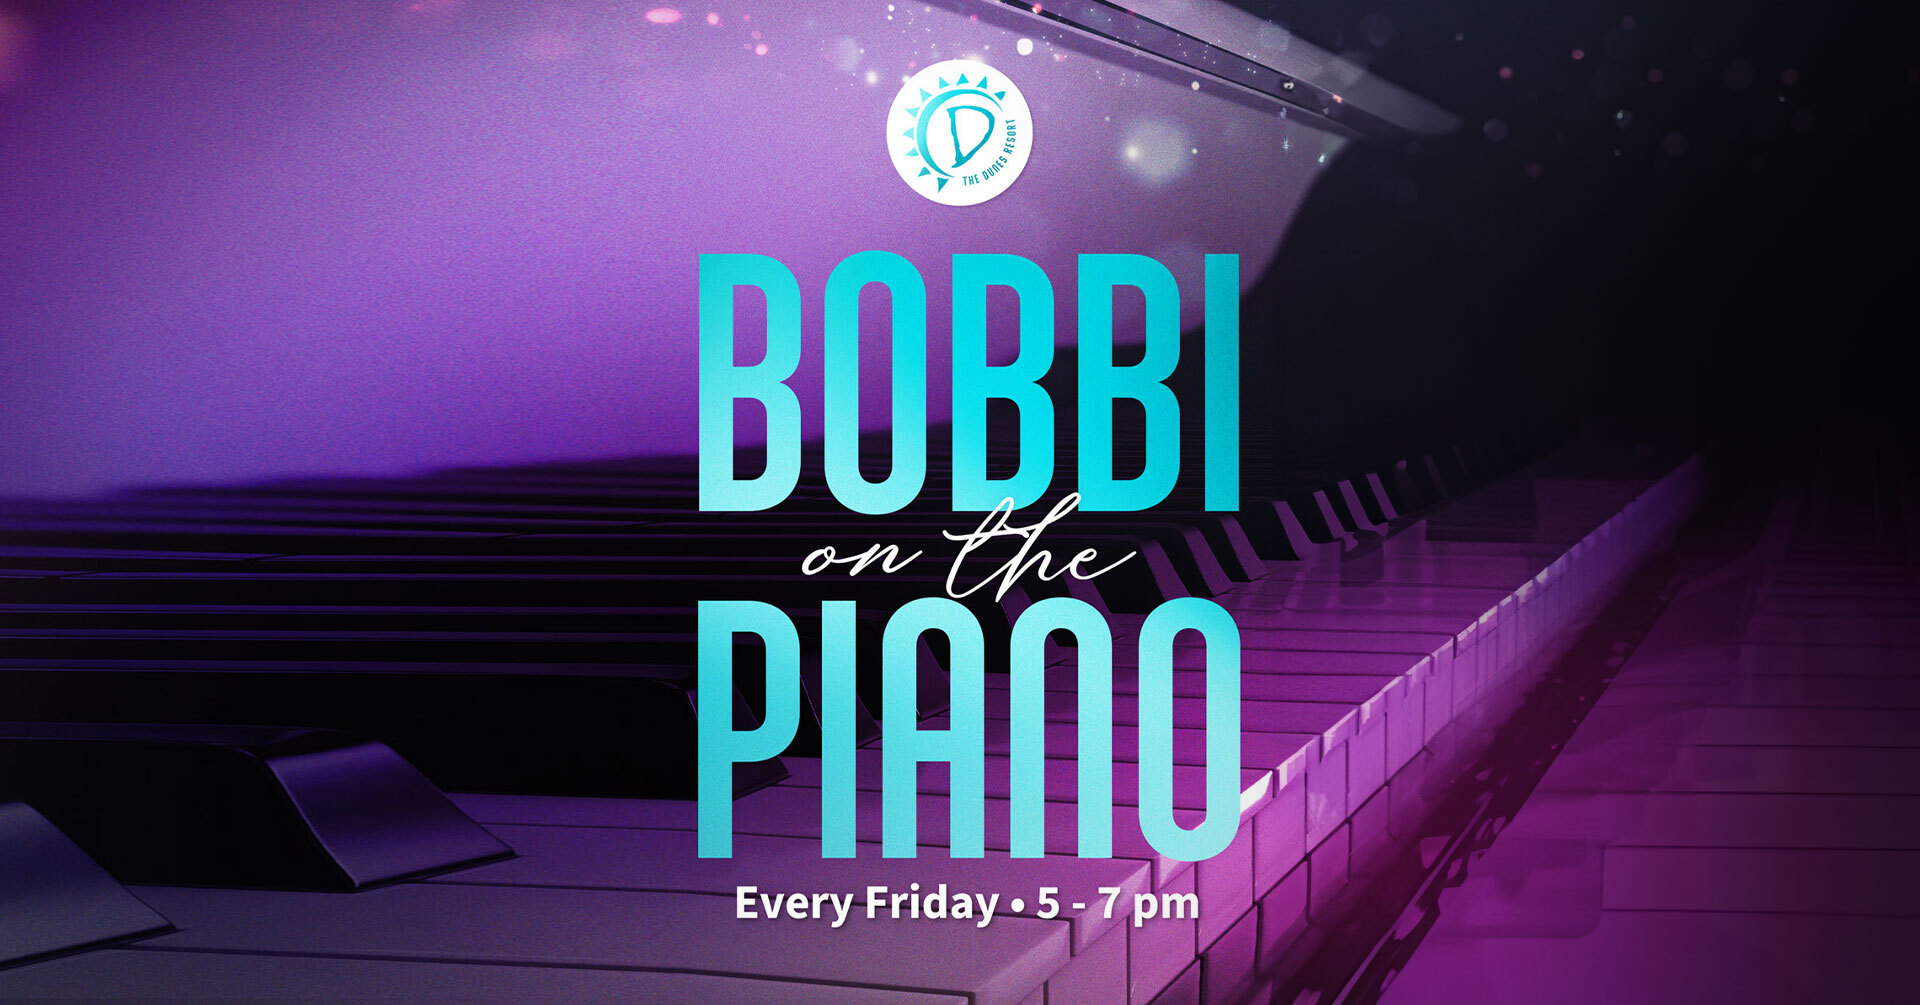 Bobbi on the Piano. Every Friday from 5pm to 7pm.